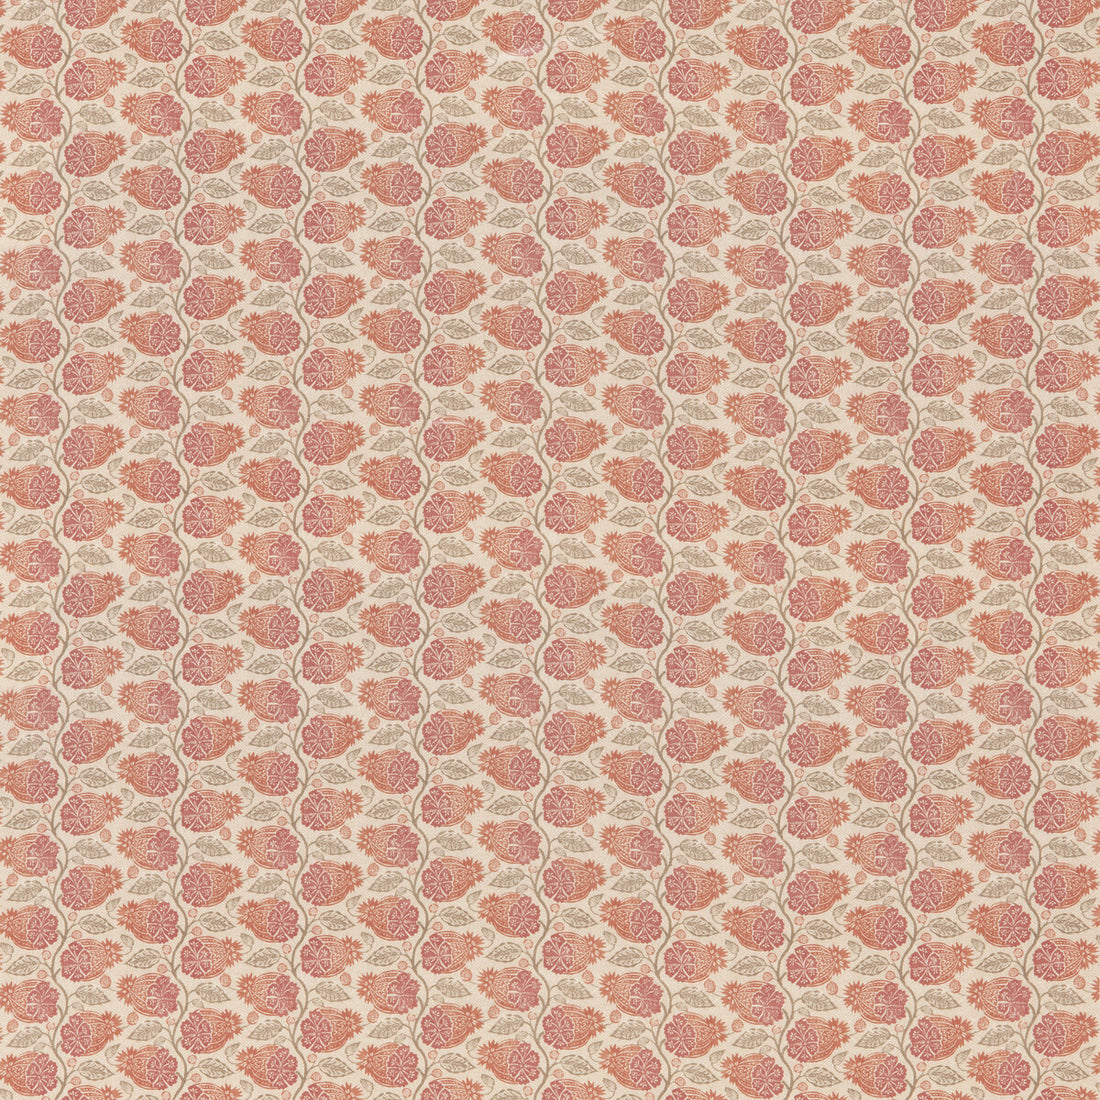 Calcot fabric in red color - pattern BP11000.3.0 - by G P &amp; J Baker in the House Small Prints collection